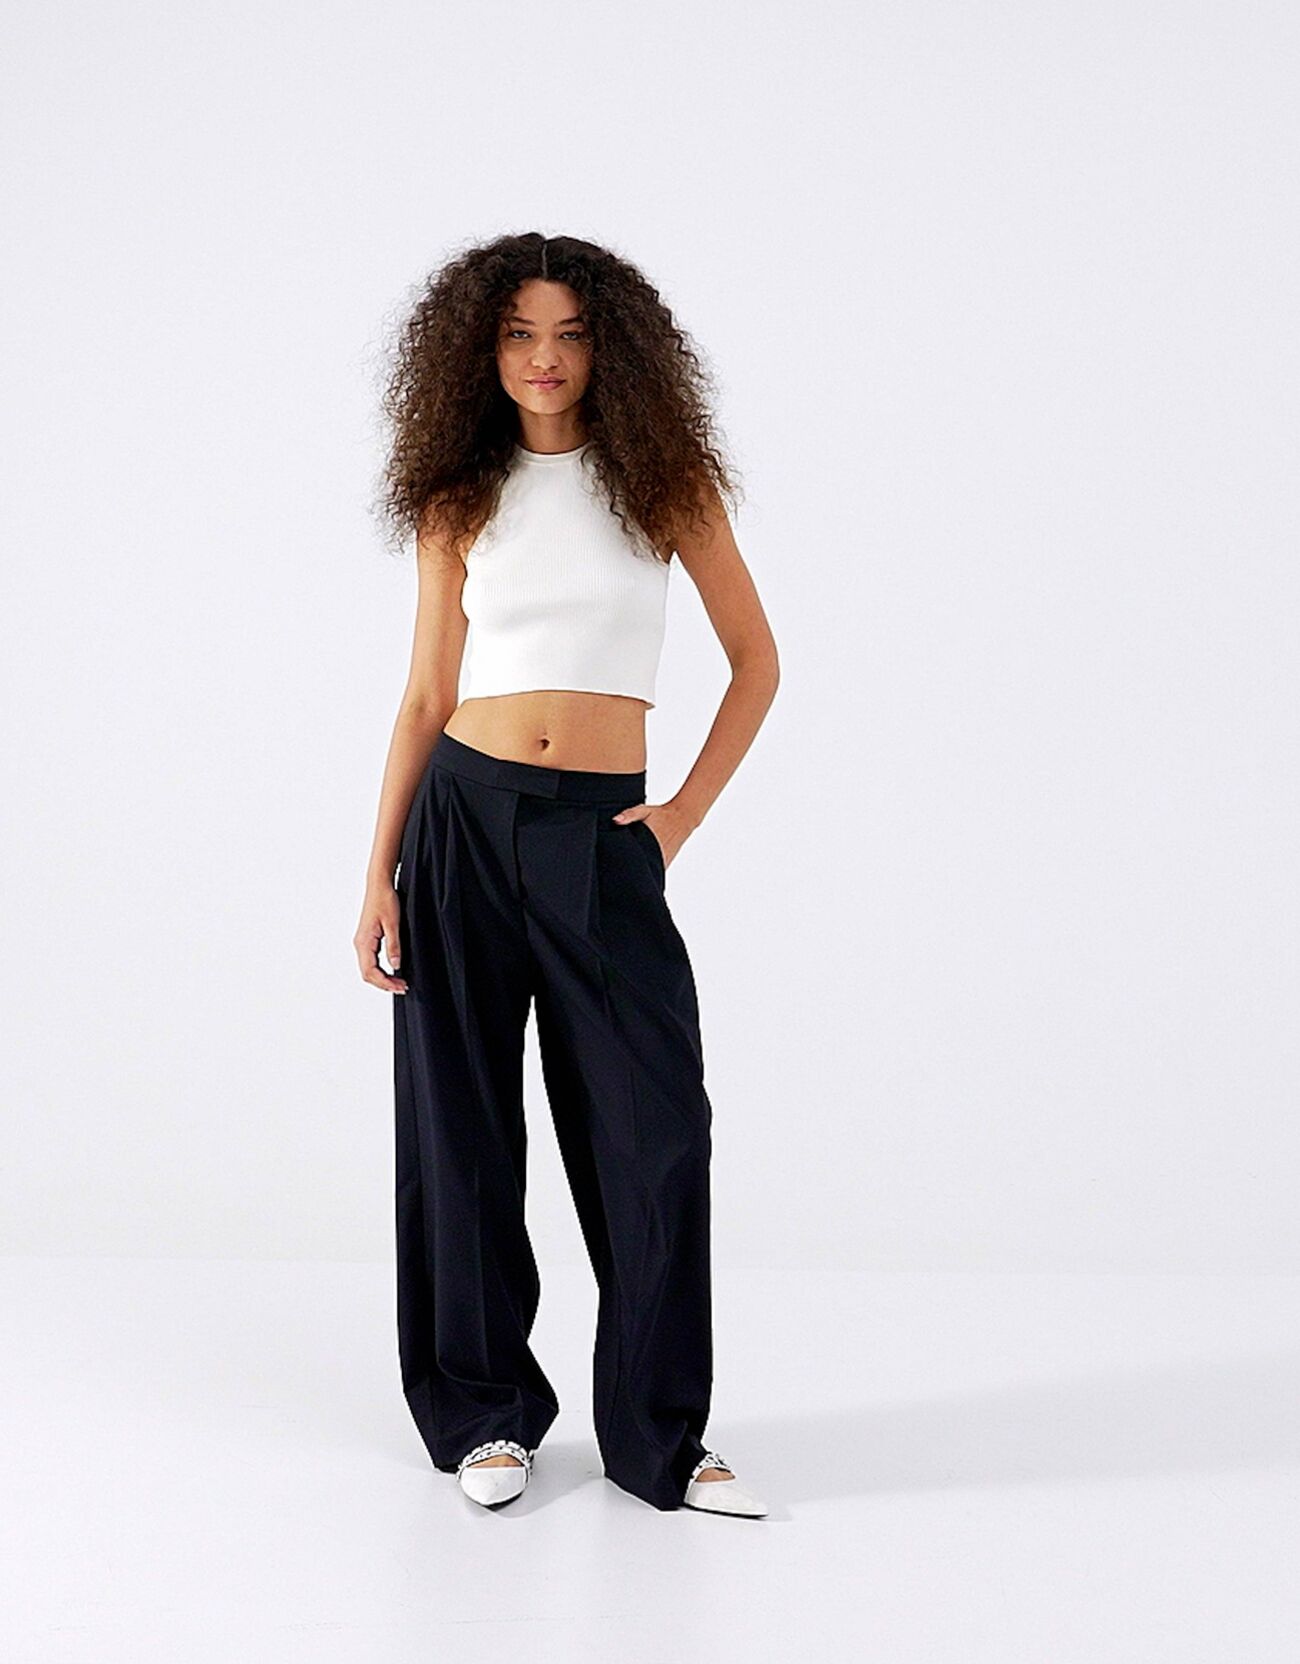 CONTRASTING DOUBLE WAISTBAND PANTS - Black